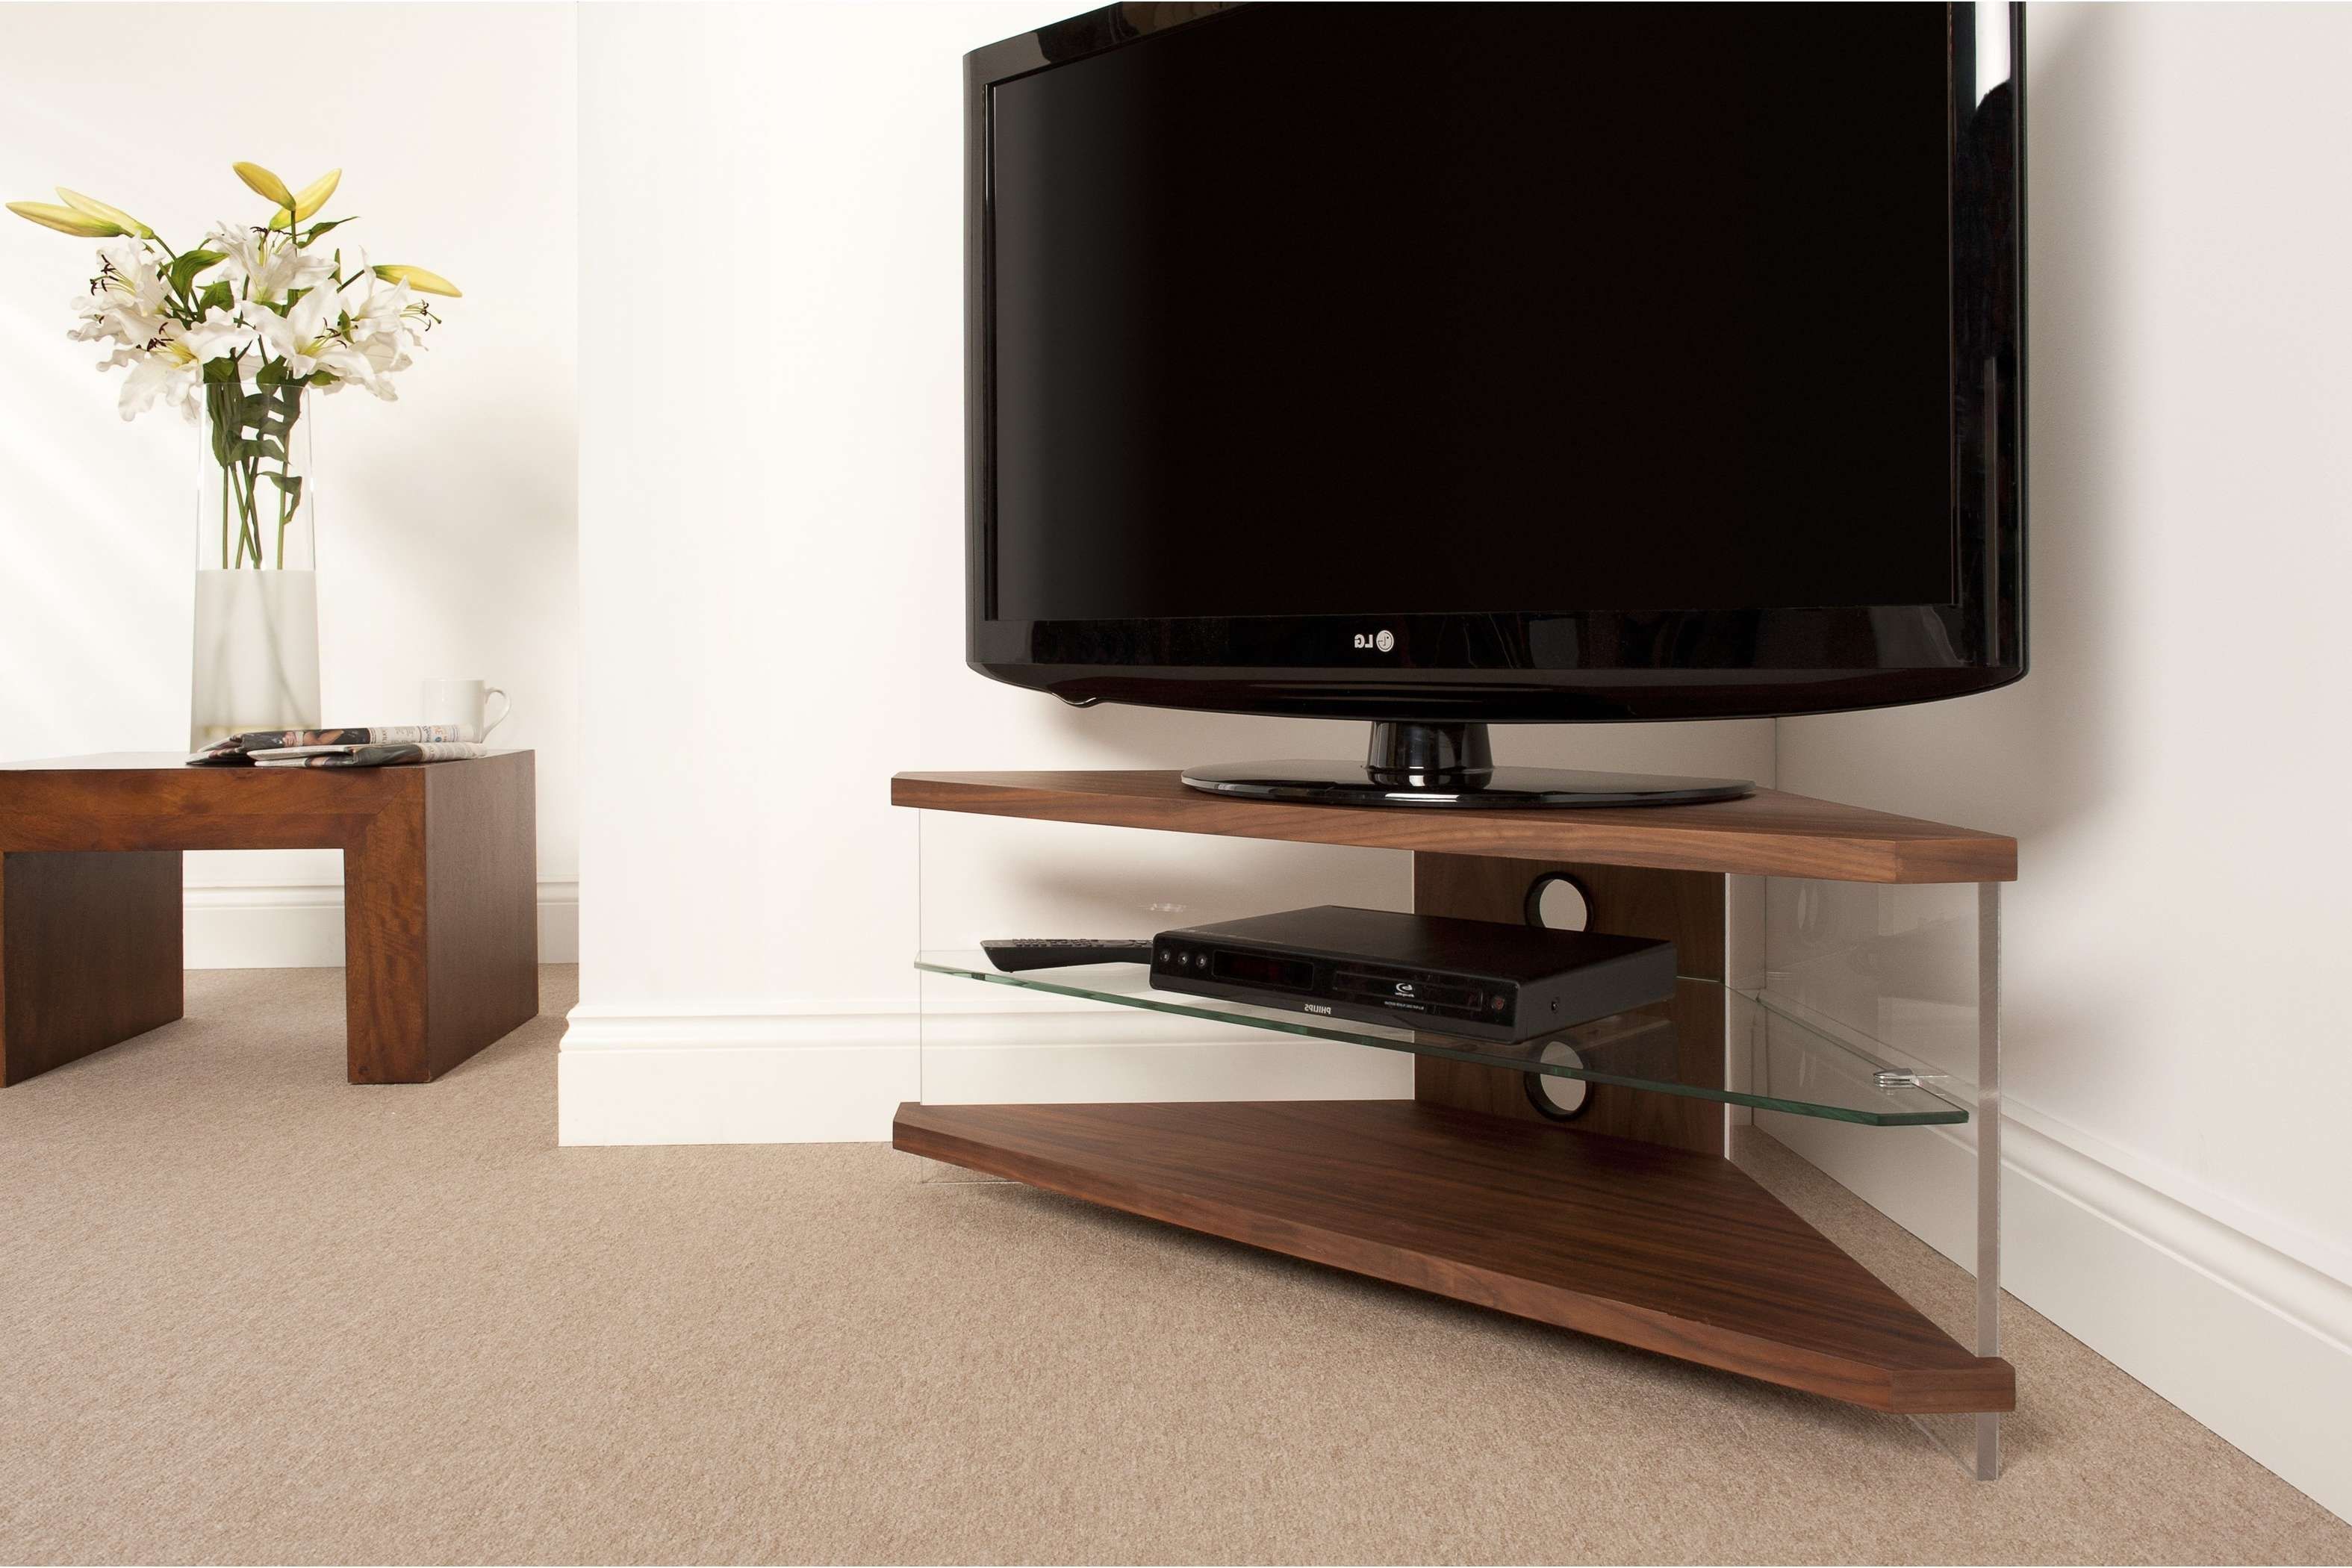 Appalling Glass Furniture Tv Stand Small Room Storage On Glass Pertaining To Tv Stands For Small Rooms (View 15 of 15)